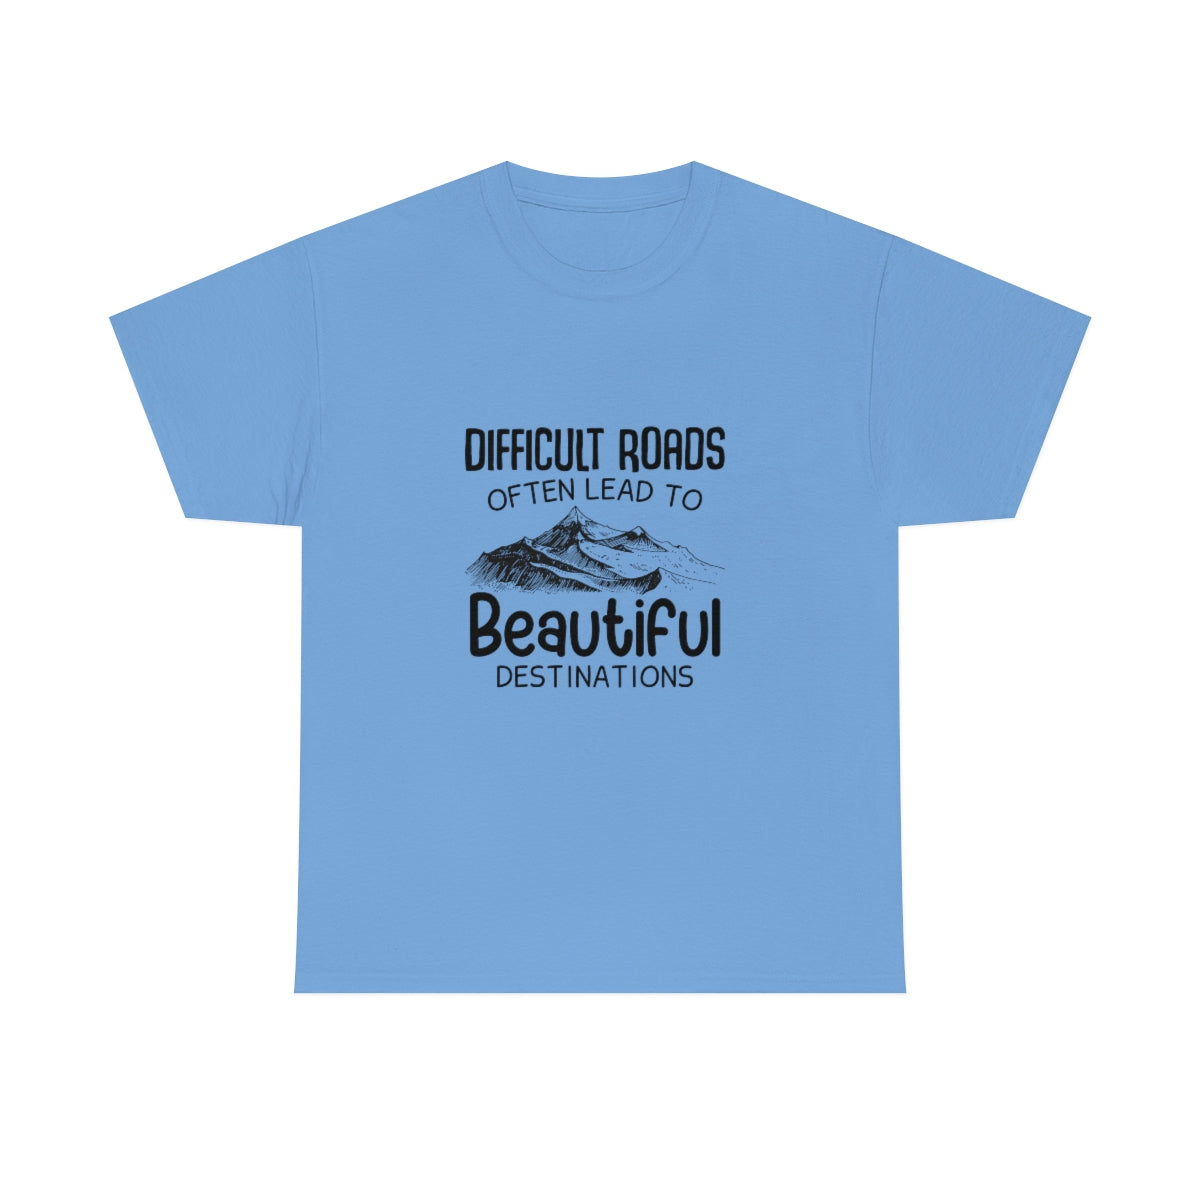 Difficult Road leads to Beautiful destinations Cotton Tee